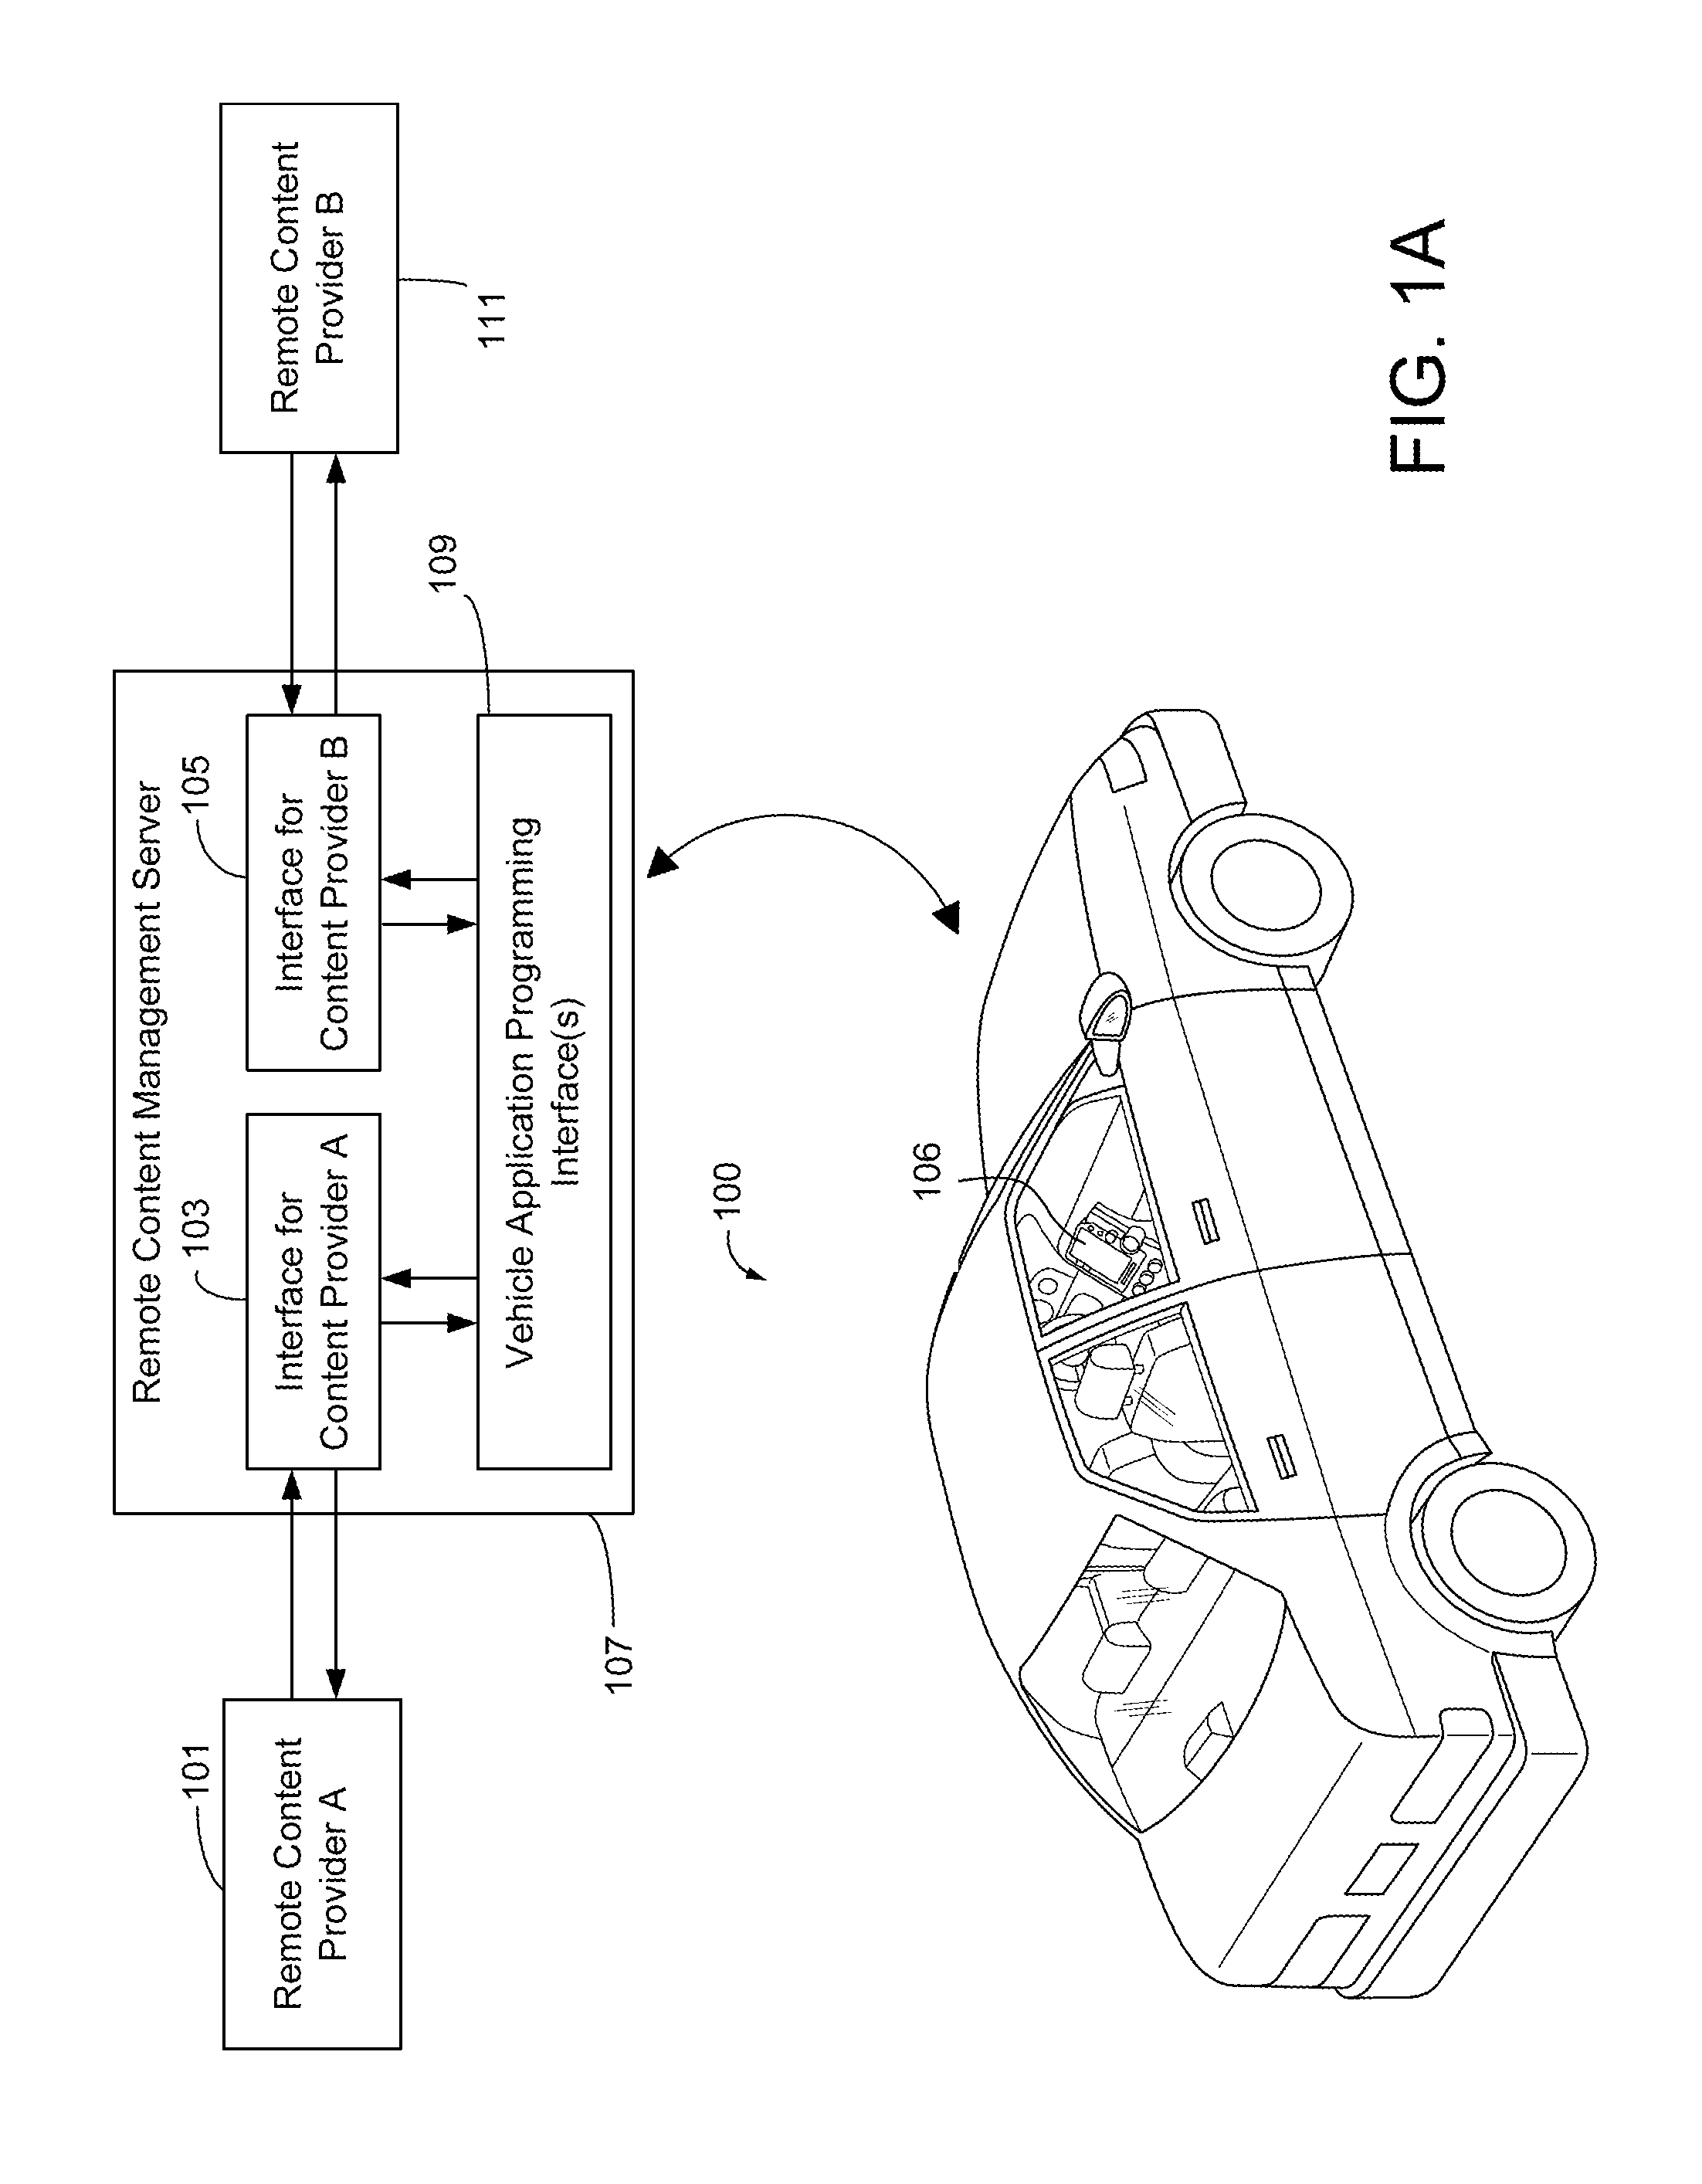 Systems and methods for providing network-based content to an in-vehicle telematics system